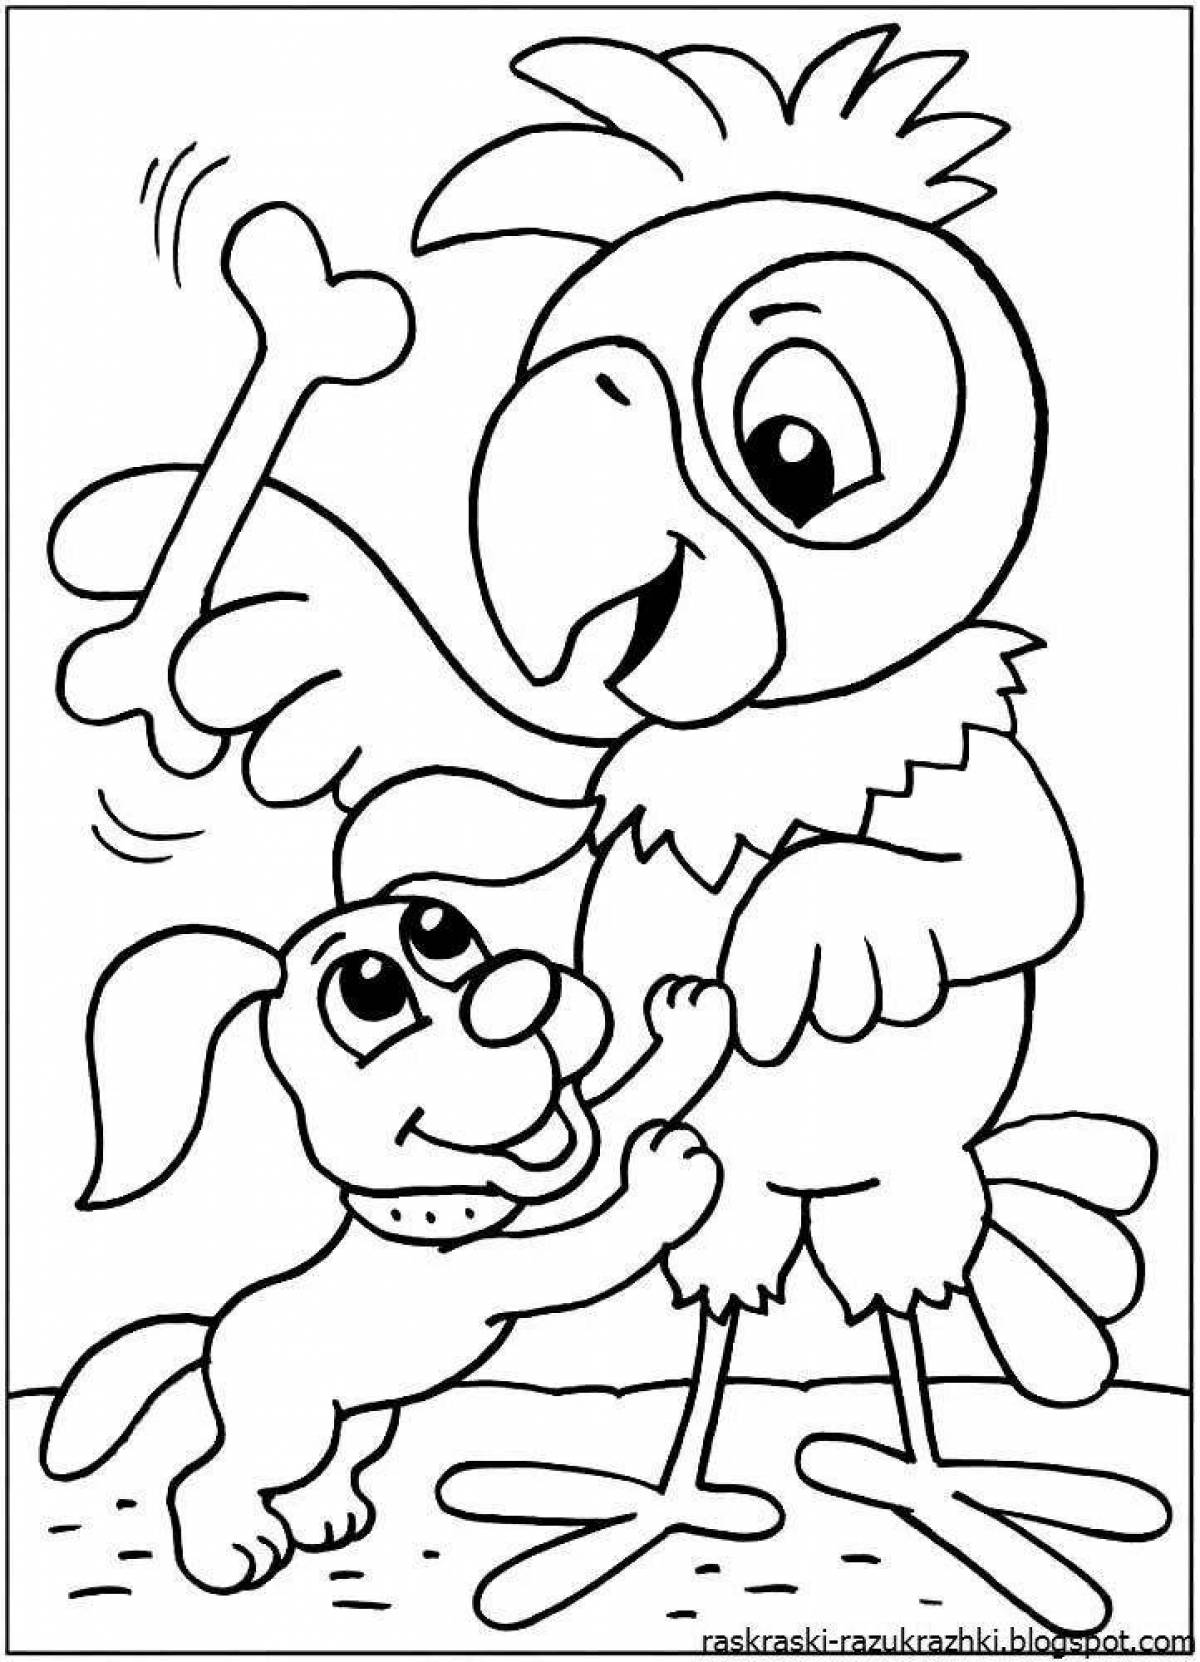 Colouring colorful-joy pdf for kids